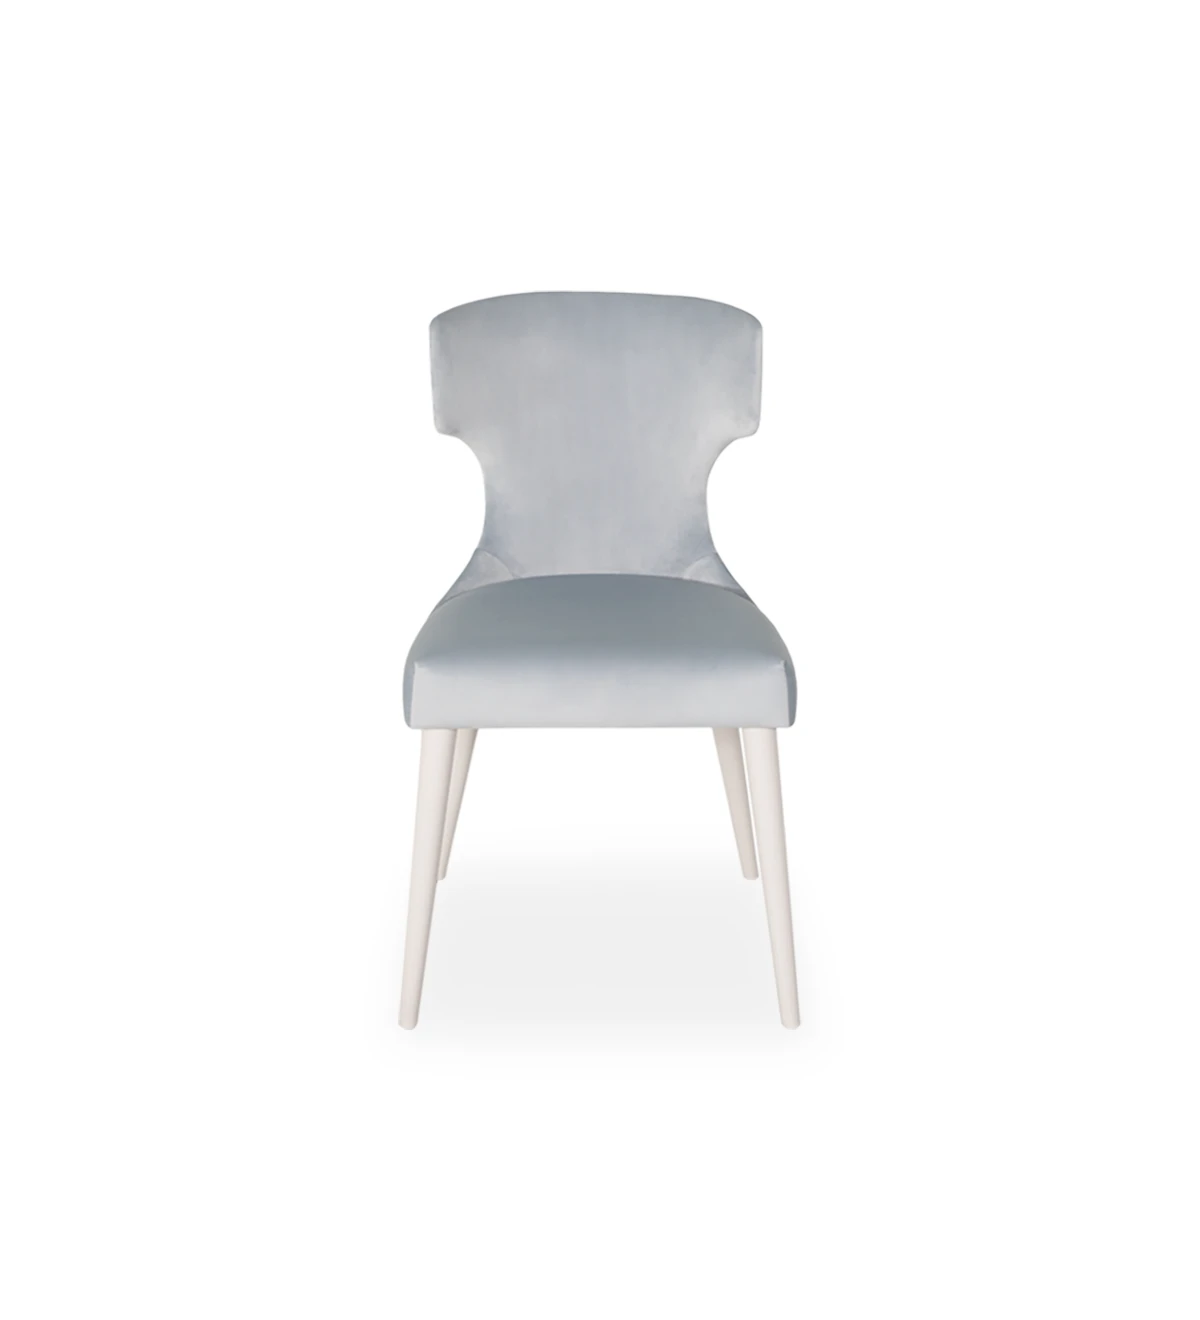 Fabric upholstered chair, with silver tack on the back and pearl lacquered feet.